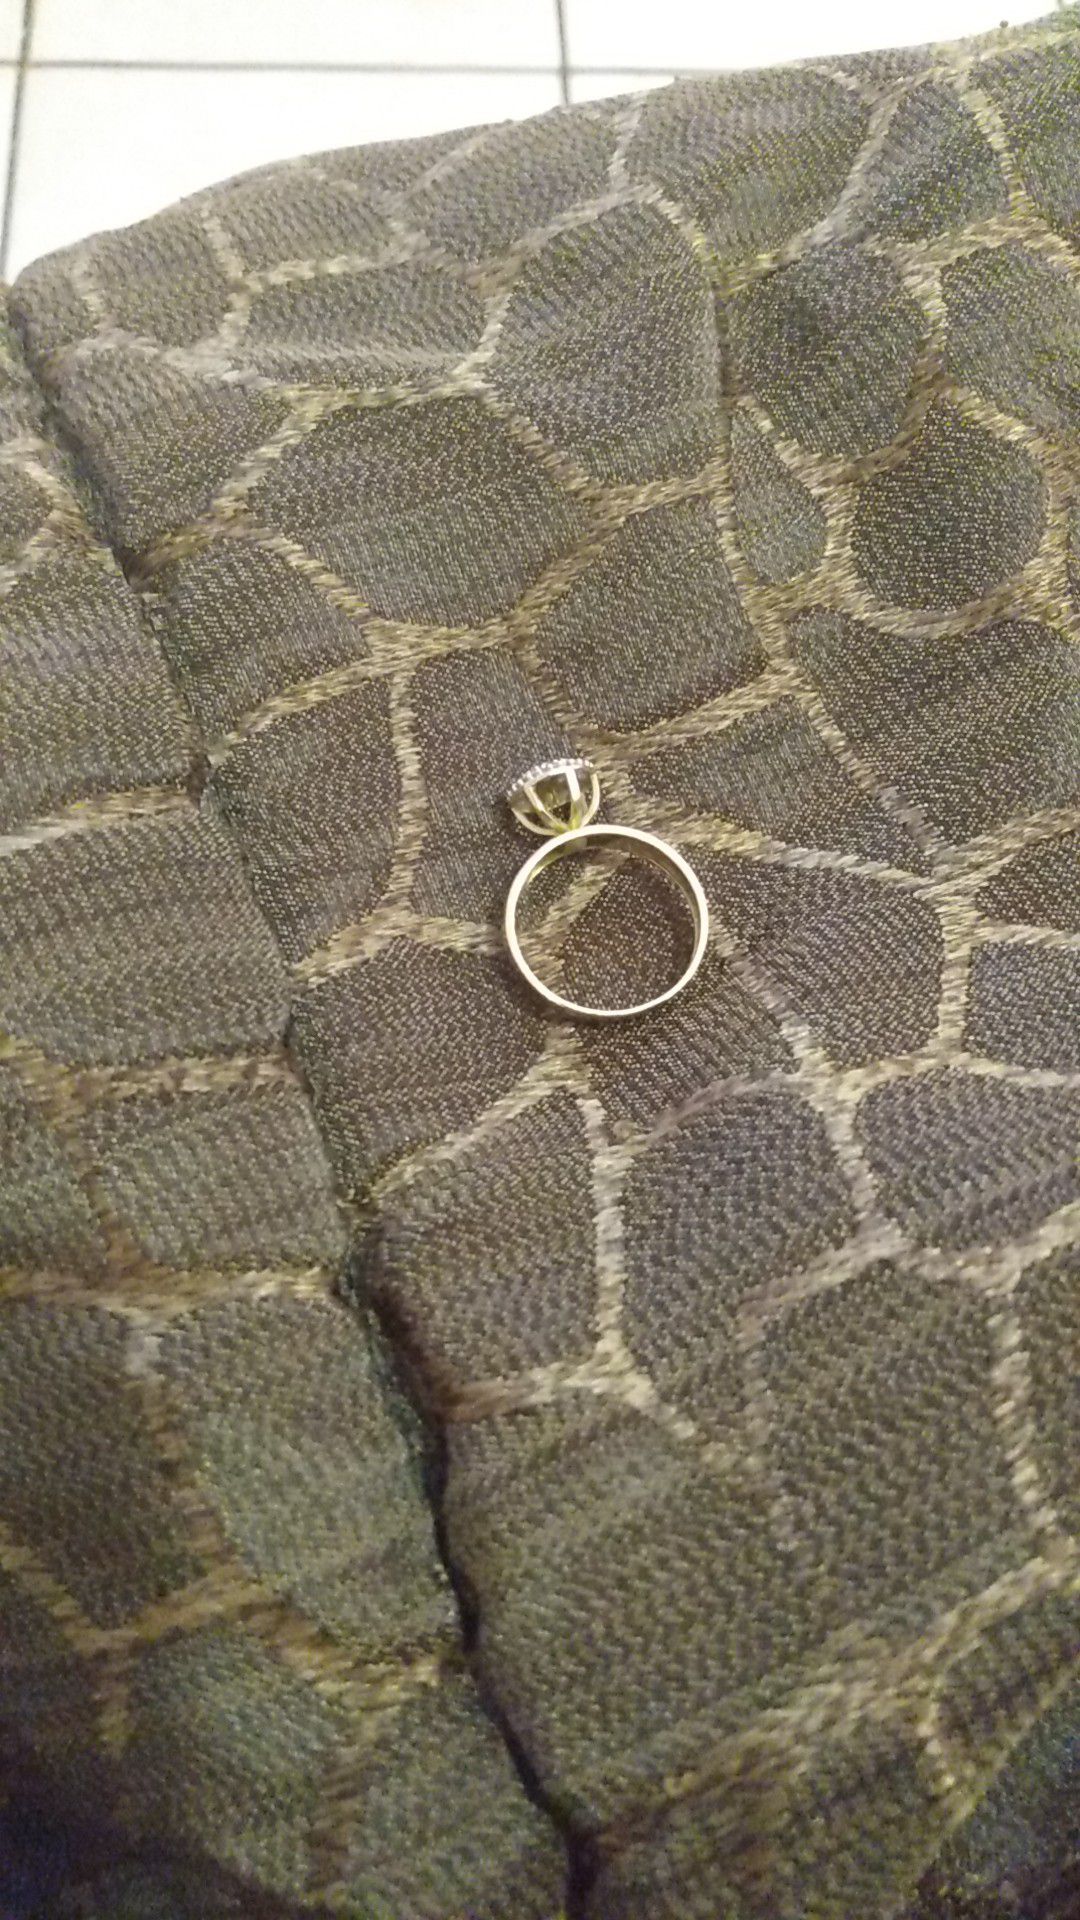 Solid Gold, engagement, wedding, promise ring $140